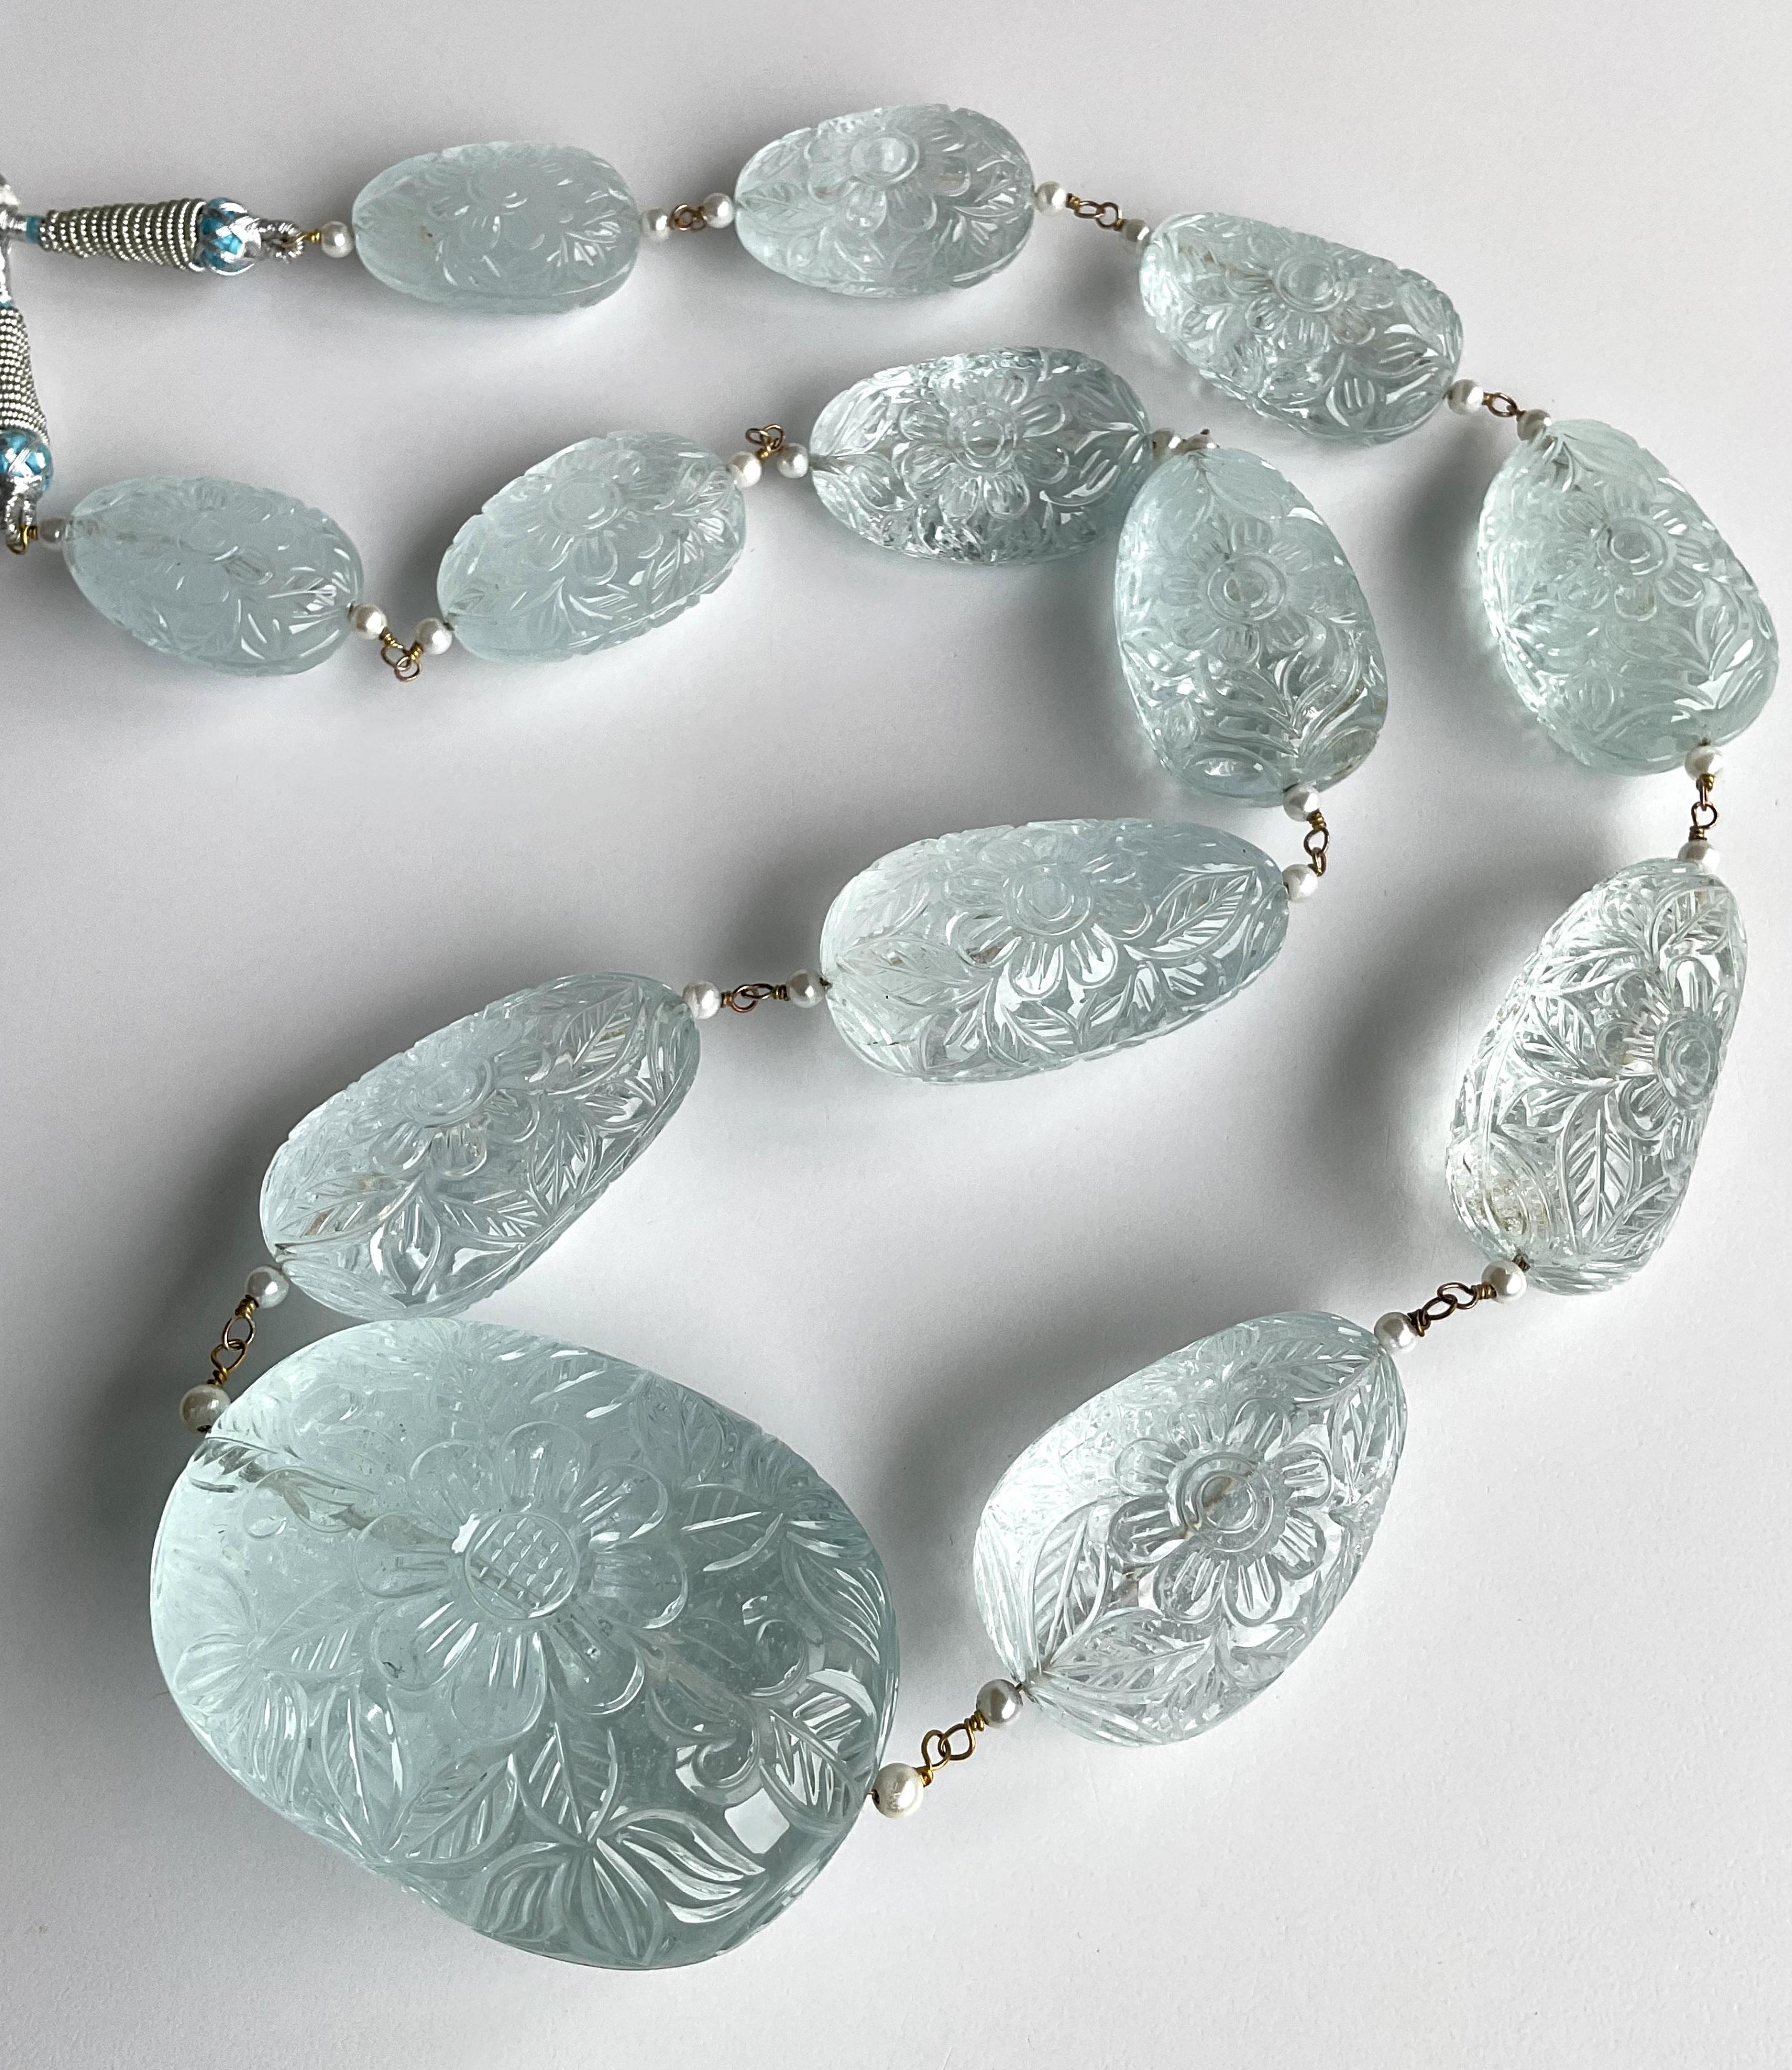 1828.70 Carats Aquamarine Carved Tumbled Necklace Top Quality Natural Gemstone For Sale 2